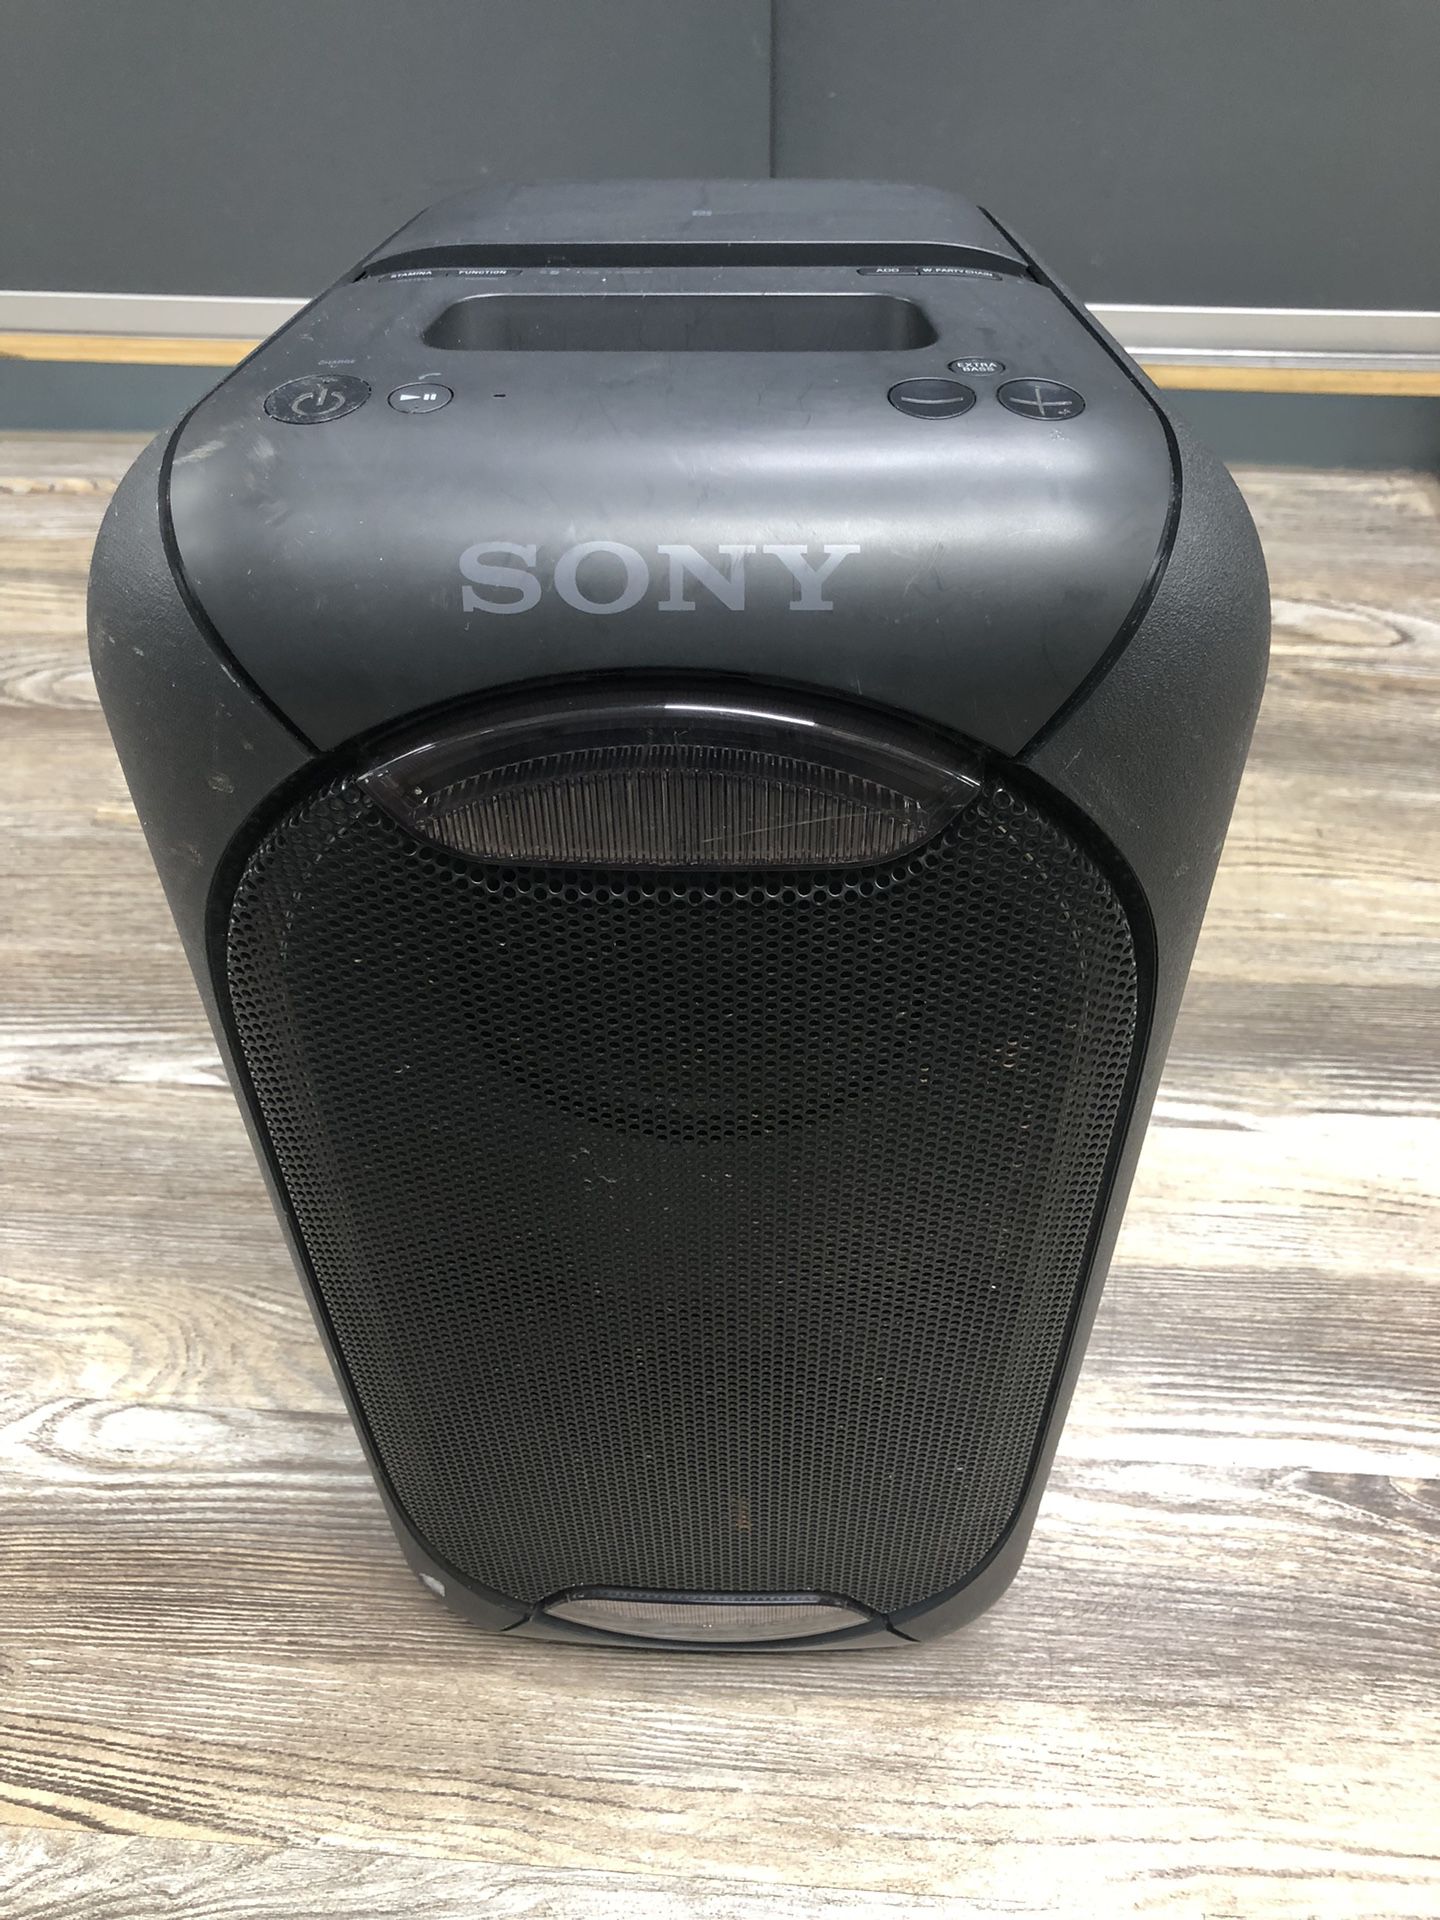 SONY XB60 EXTRA BASS HIGH POWER AUDIO SYSTEM WITH BUILT IN BATTERY WORKS GREAT